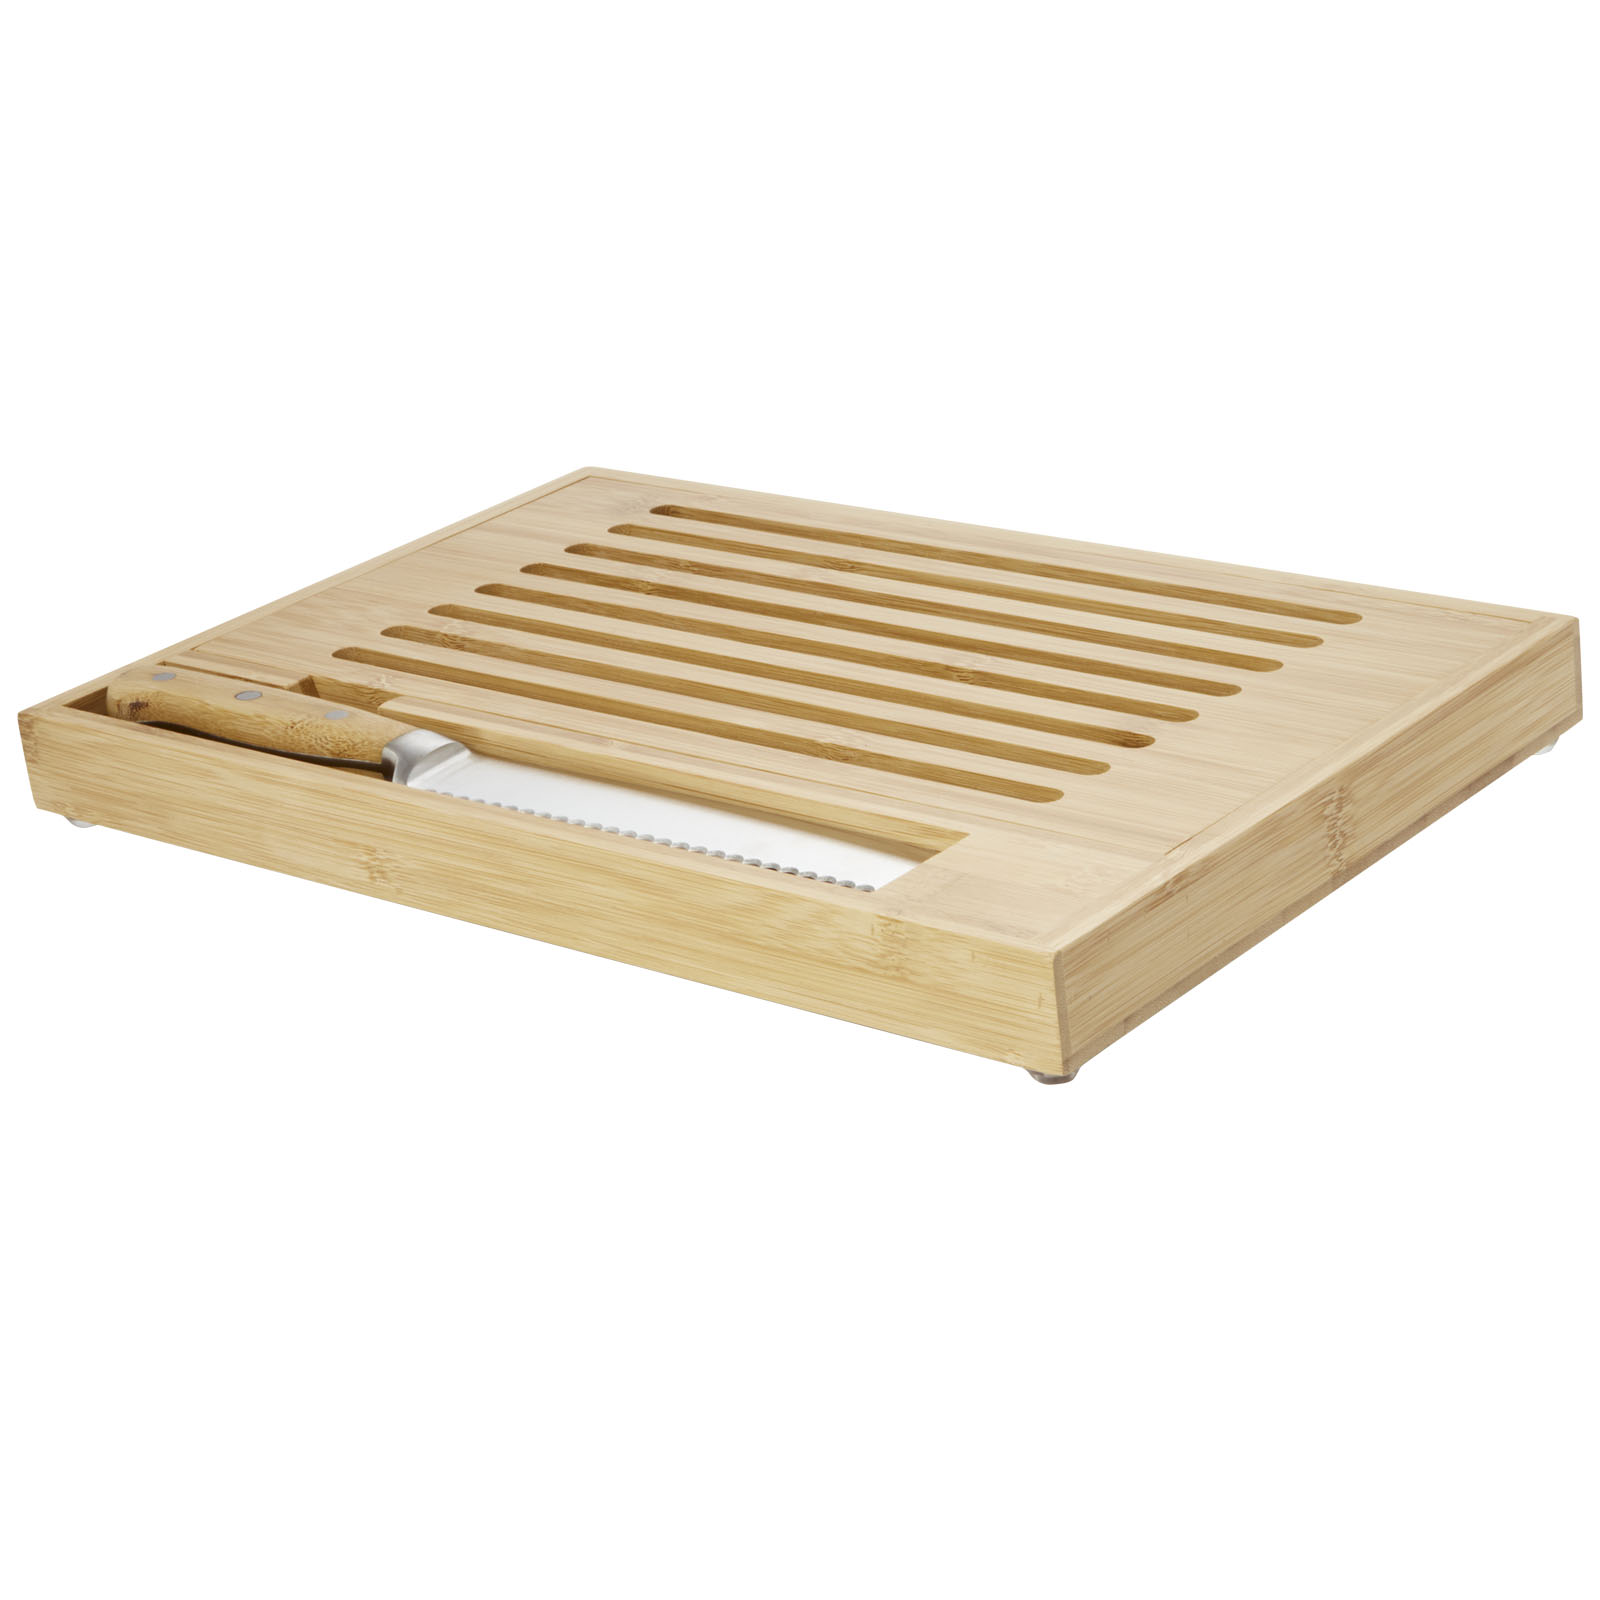 Advertising Cutting Boards - Pao bamboo cutting board with knife - 3